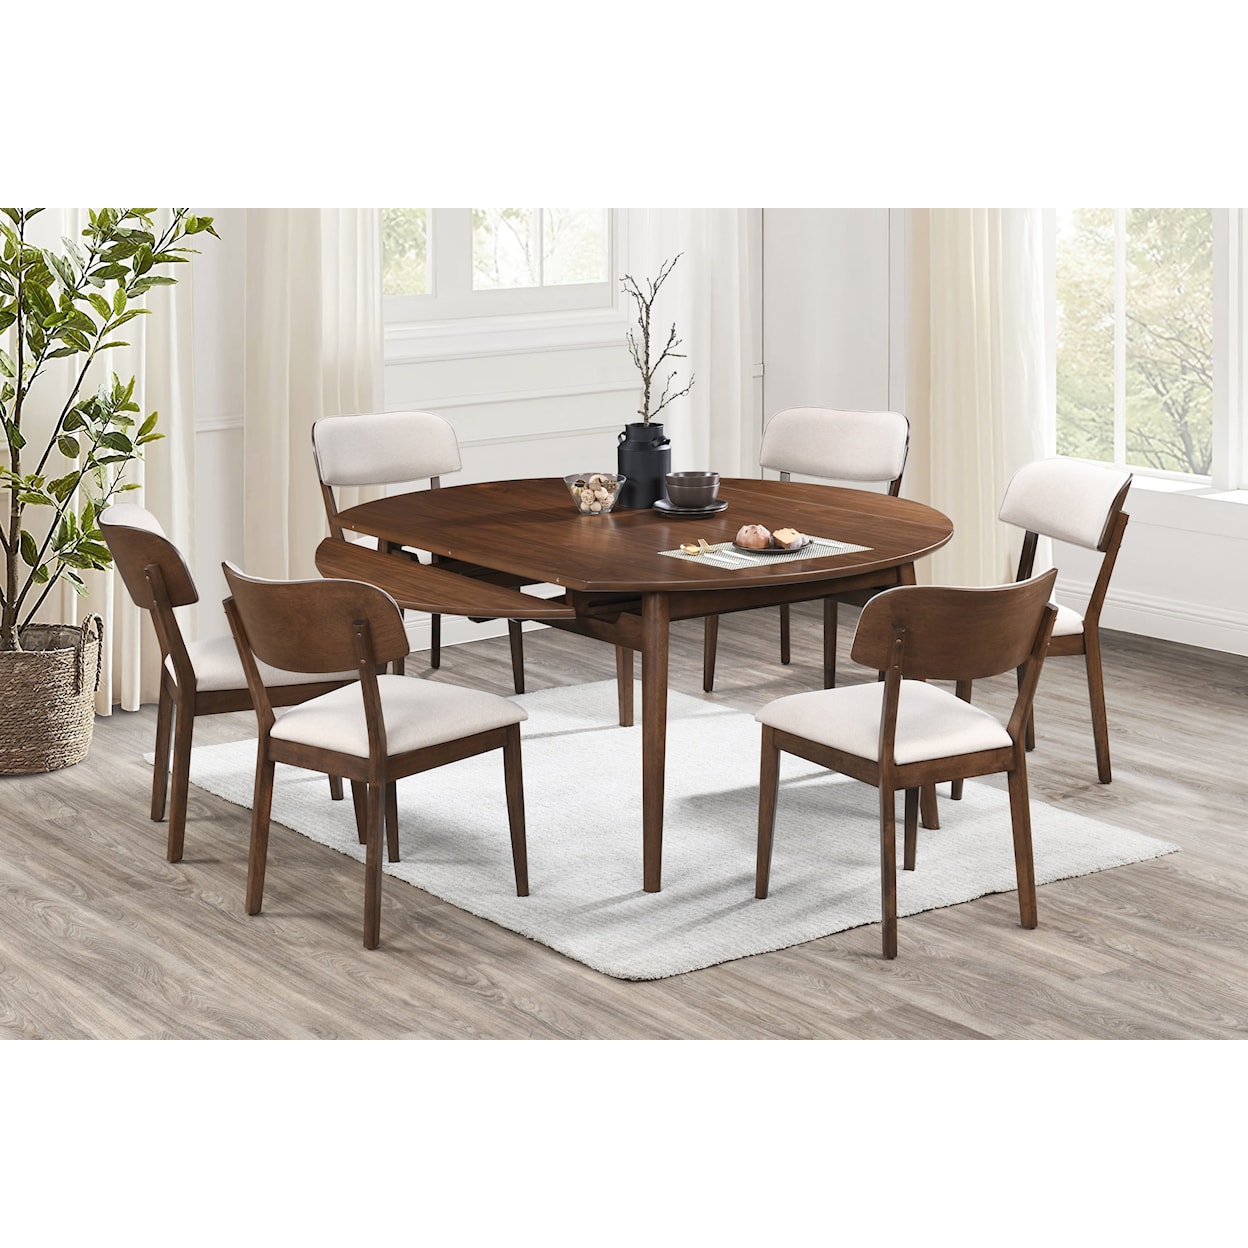 New Classic Furniture Bergen Dining Chair